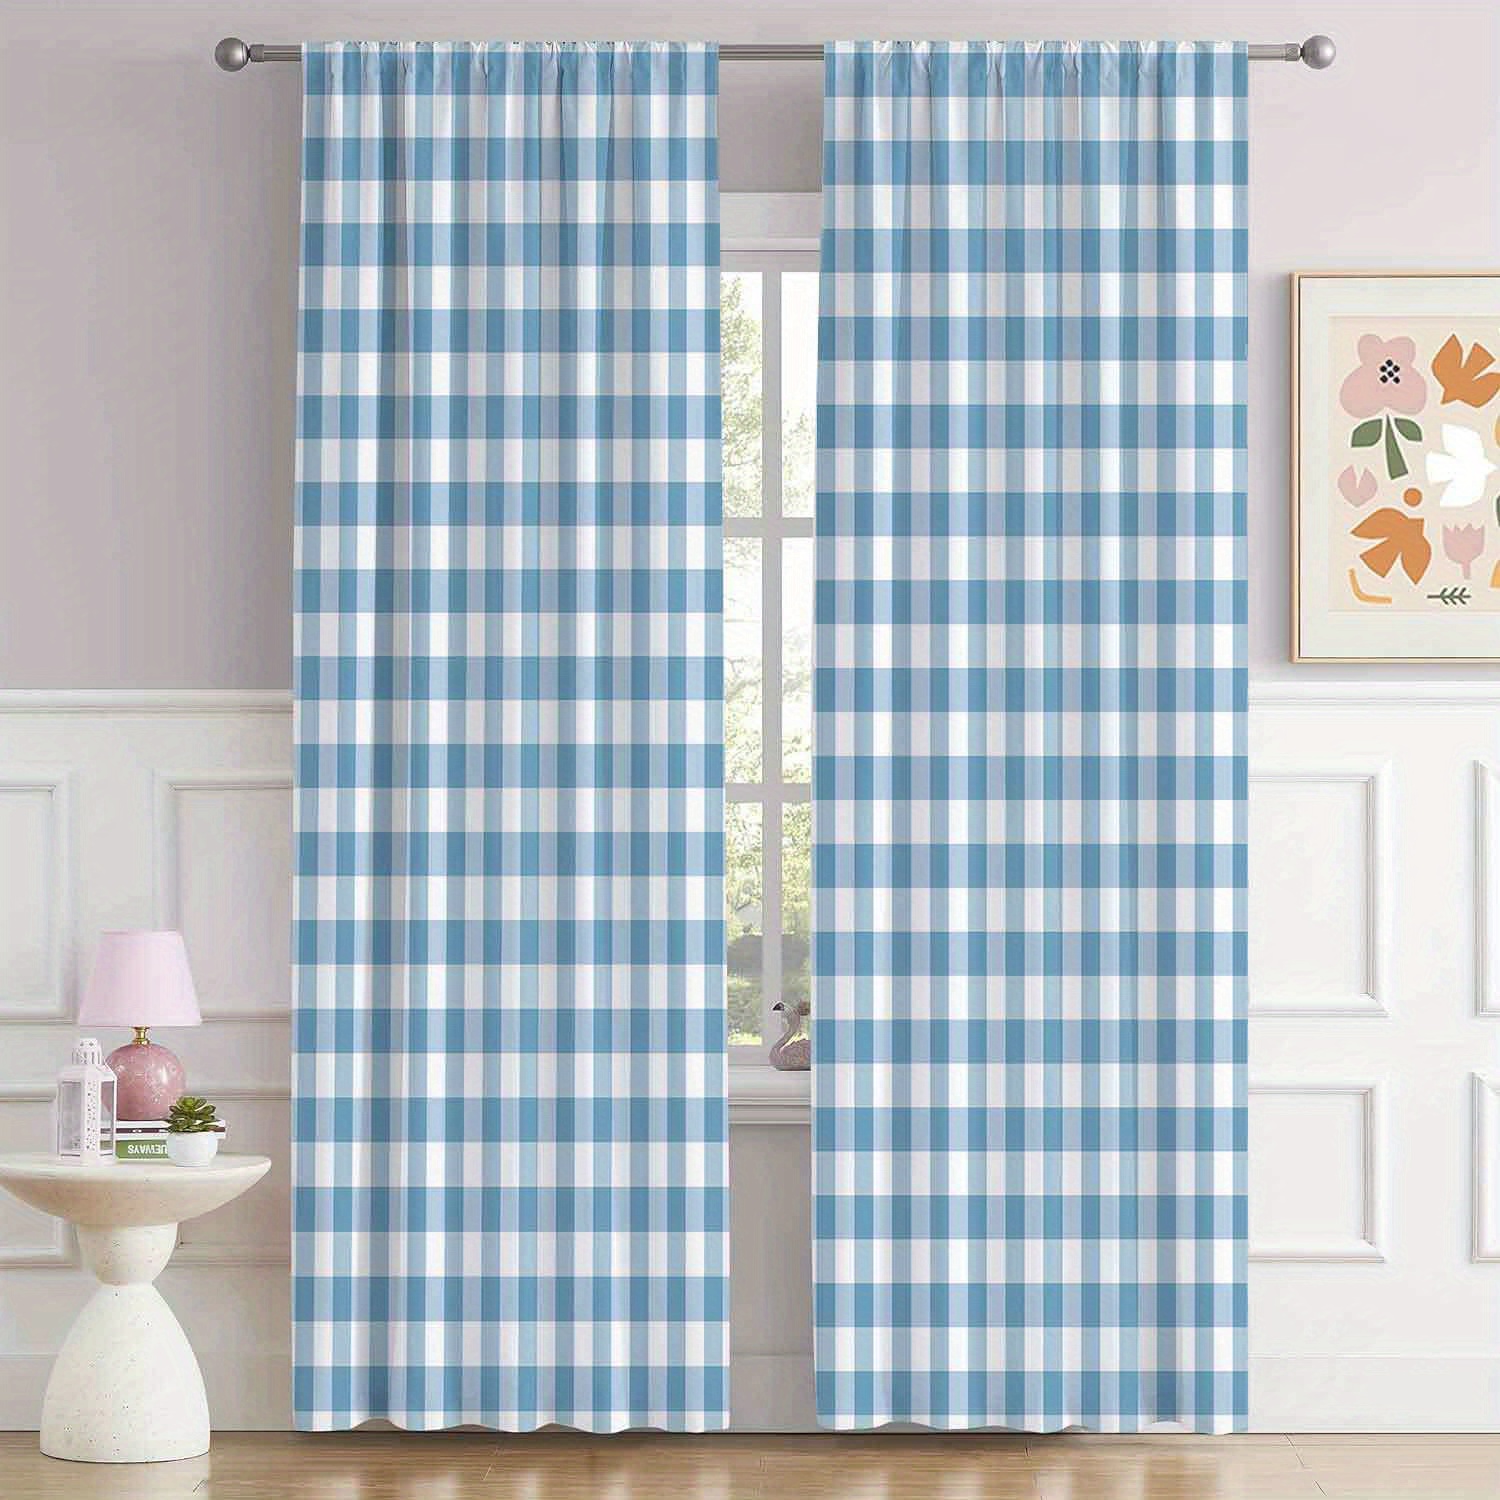 

Boho-chic Blue Plaid Geometric Curtains - Easy Care, Perfect For Living Room & Bedroom Decor, Durable Polyester With Tieback Design